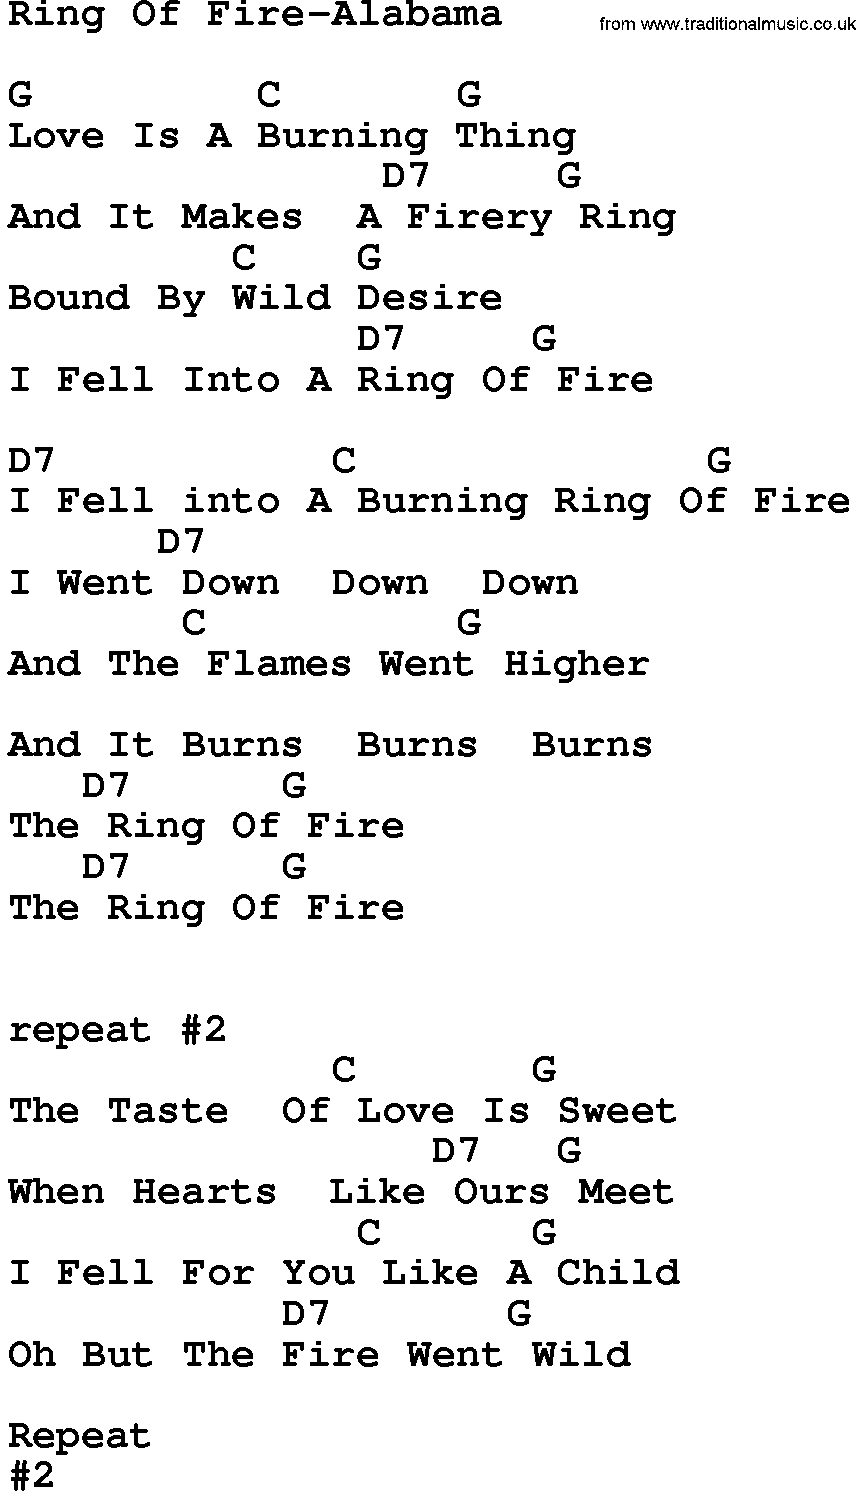 Country music song: Ring Of Fire-Alabama lyrics and chords